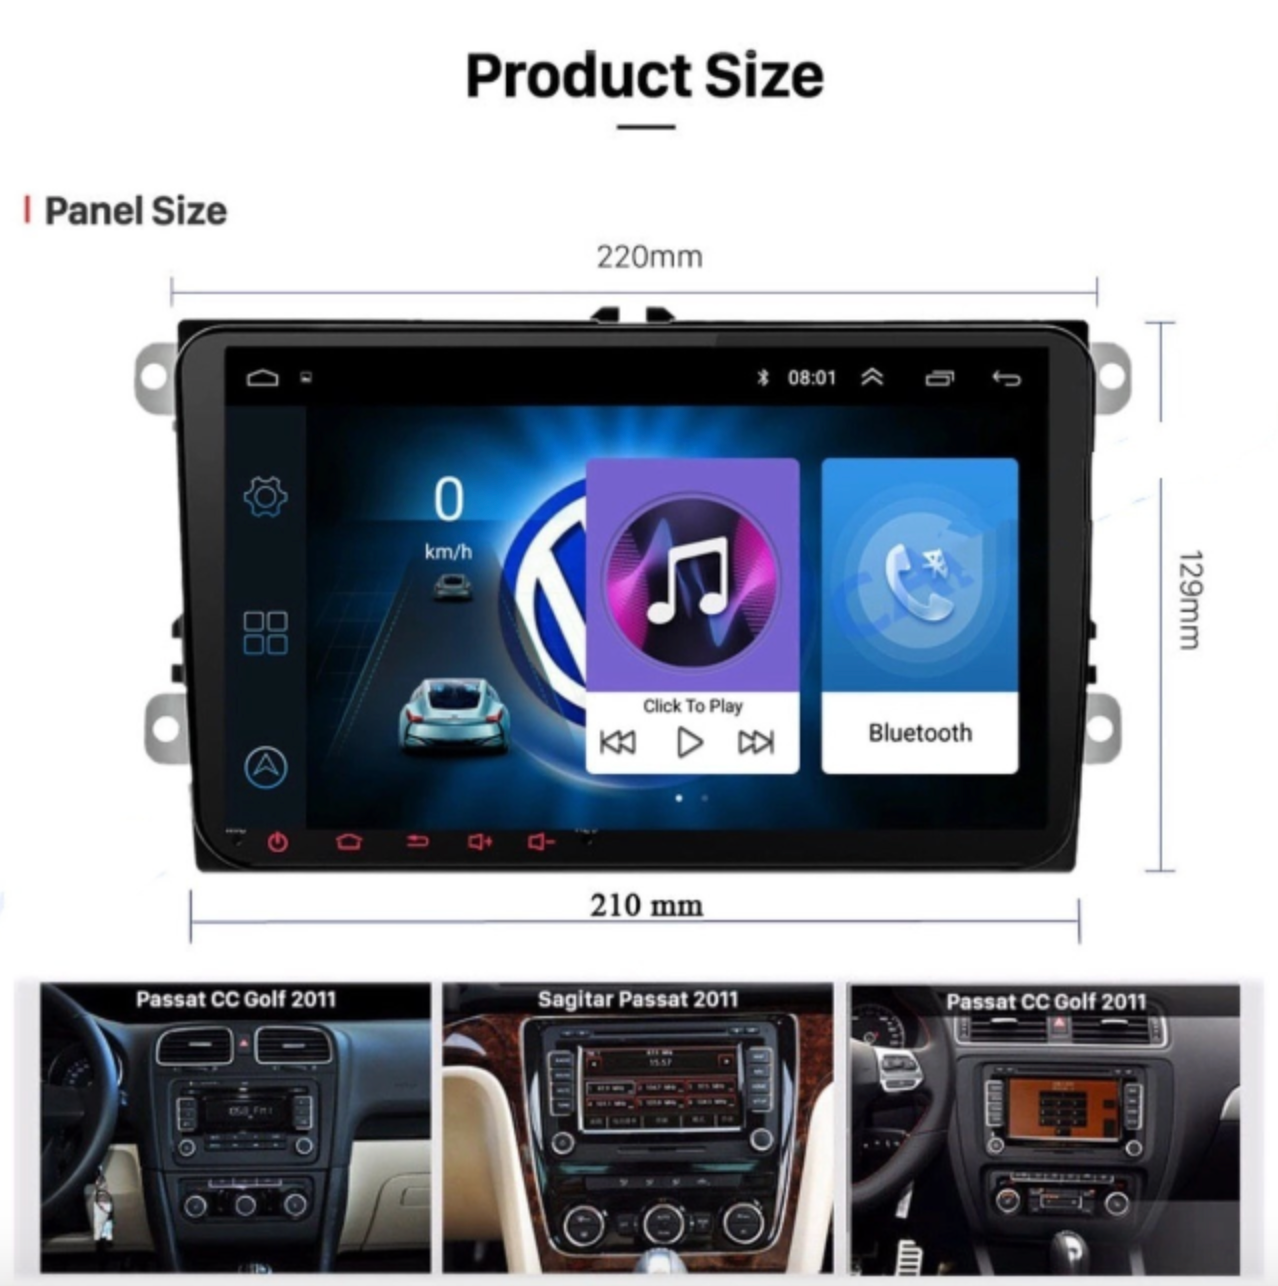 Suitable for VW Android 8.1 Double DIN Head Unit + Reversing Camera for Volkswagen, Skoda Bluetooth, Radio, Video Player